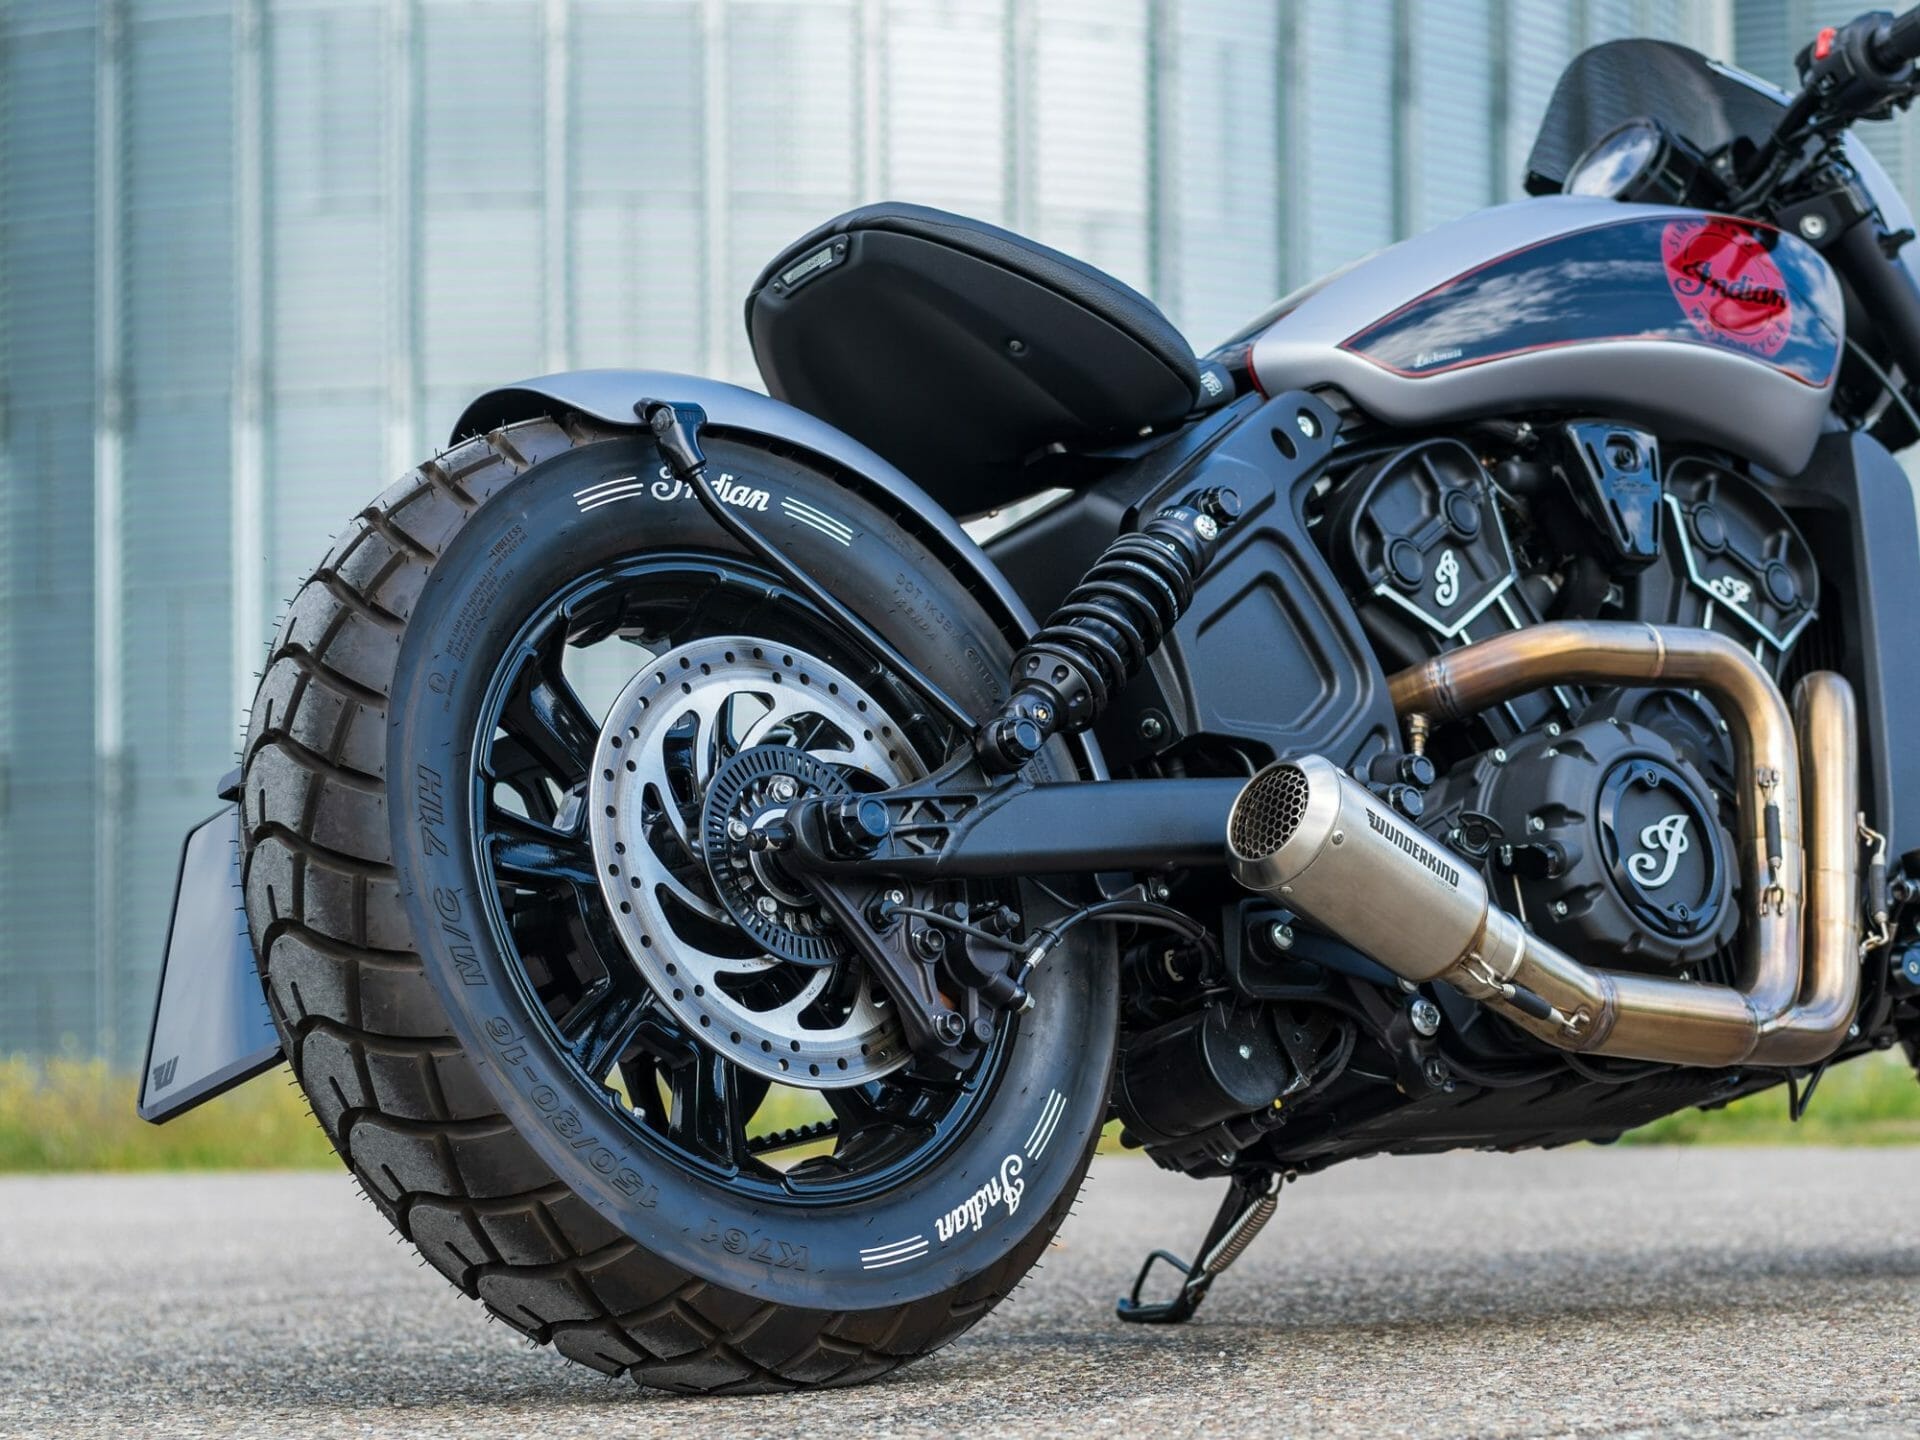 Wunderkind: NEWCHURCH THREE Bobber rear fender conversion kit
- also in the app Motorcycle News